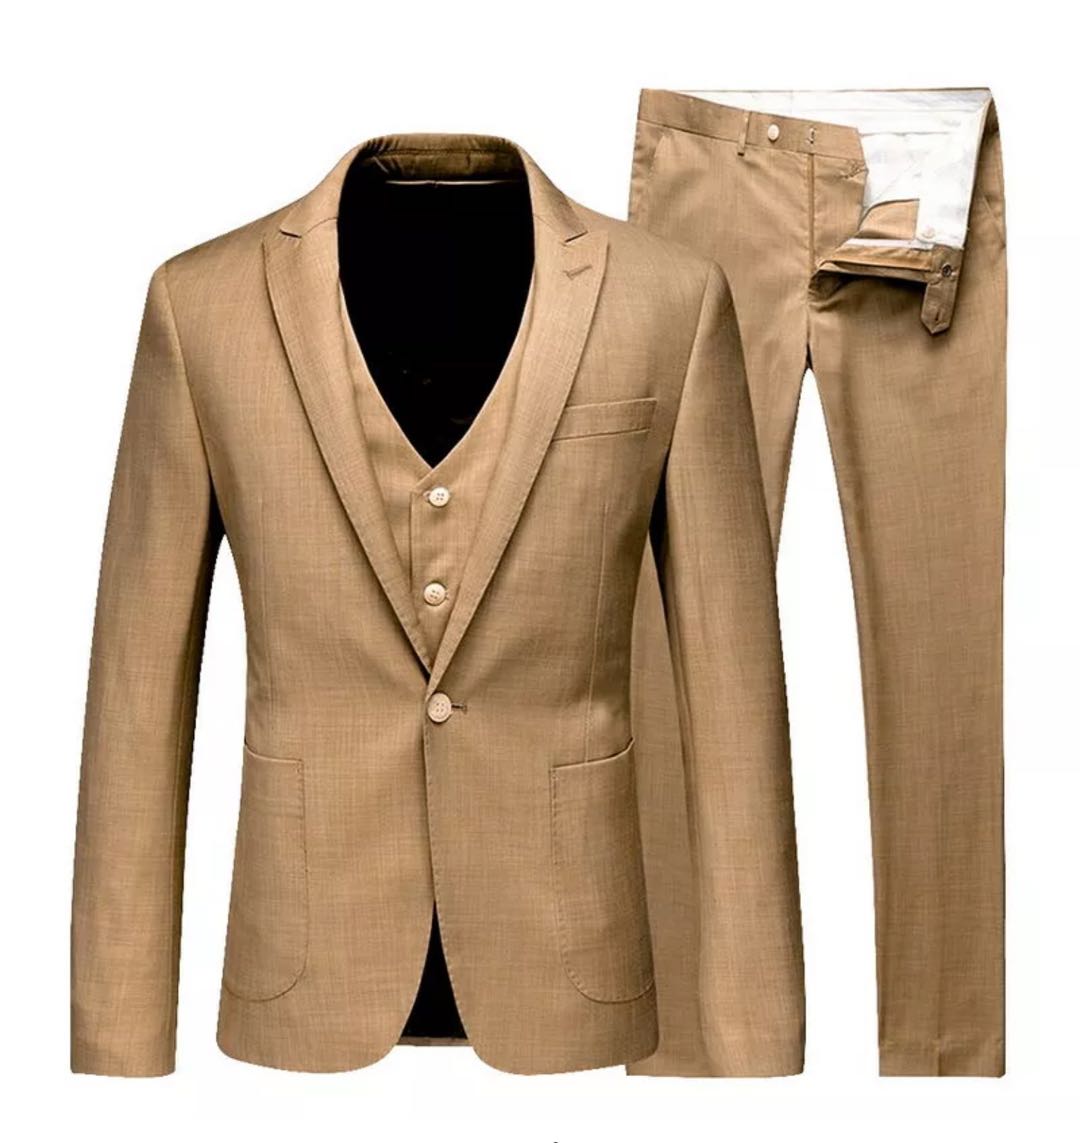 Easter suits for men – There’s a Style to Fit You插图4